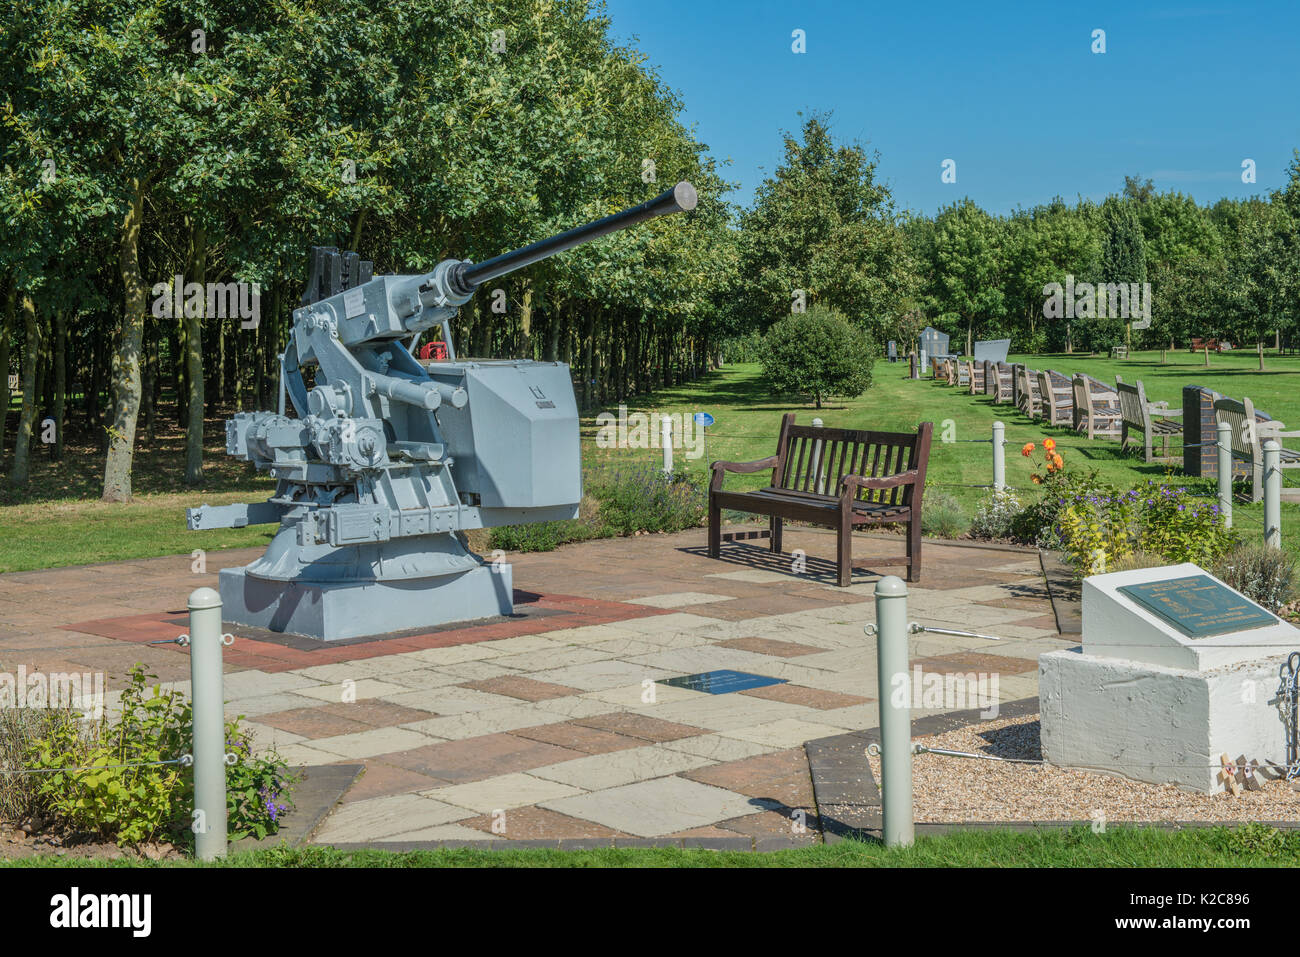 Bofors gun displayed in the Defensively Equipped Merchant Ships (D.E.M.S) Memorial Garden in The National Memorial Arboretum, Alrewas, Staffordshire. Stock Photo